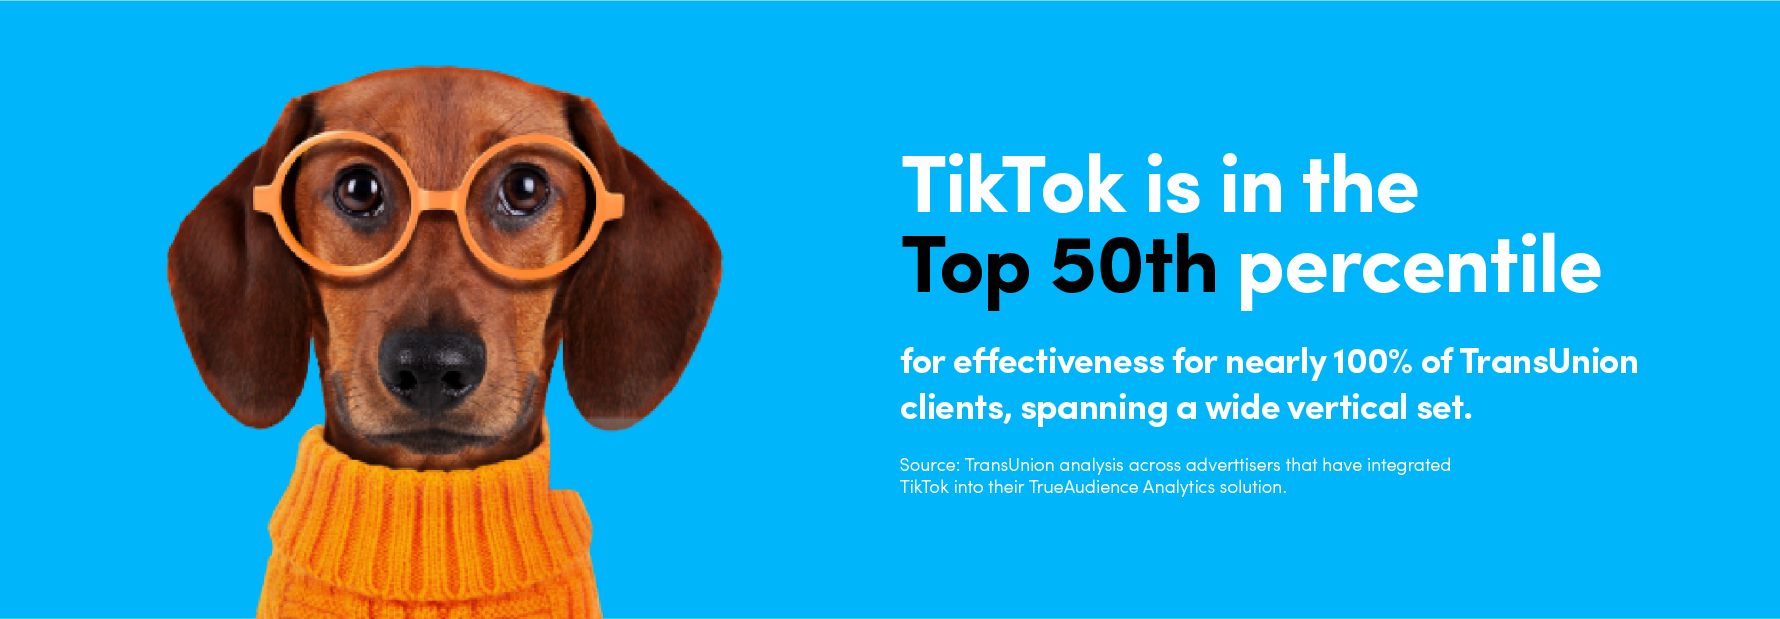 TikTok is in the Top 50th percentile for effectiveness for nearly 100% of Transunion clients